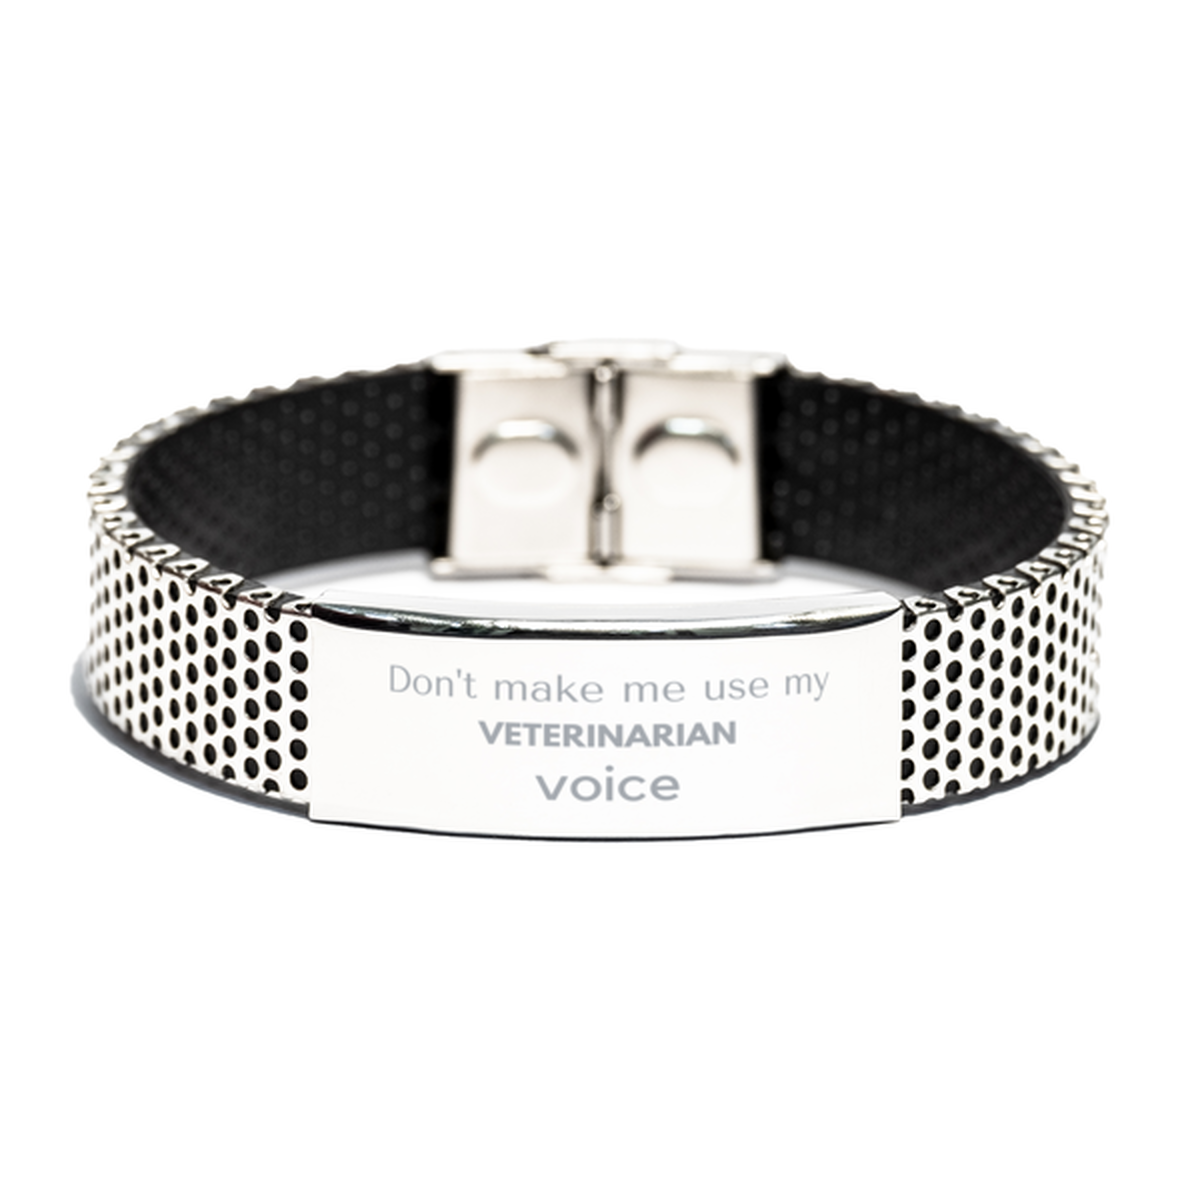 Don't make me use my Veterinarian voice, Sarcasm Veterinarian Gifts, Christmas Veterinarian Stainless Steel Bracelet Birthday Unique Gifts For Veterinarian Coworkers, Men, Women, Colleague, Friends